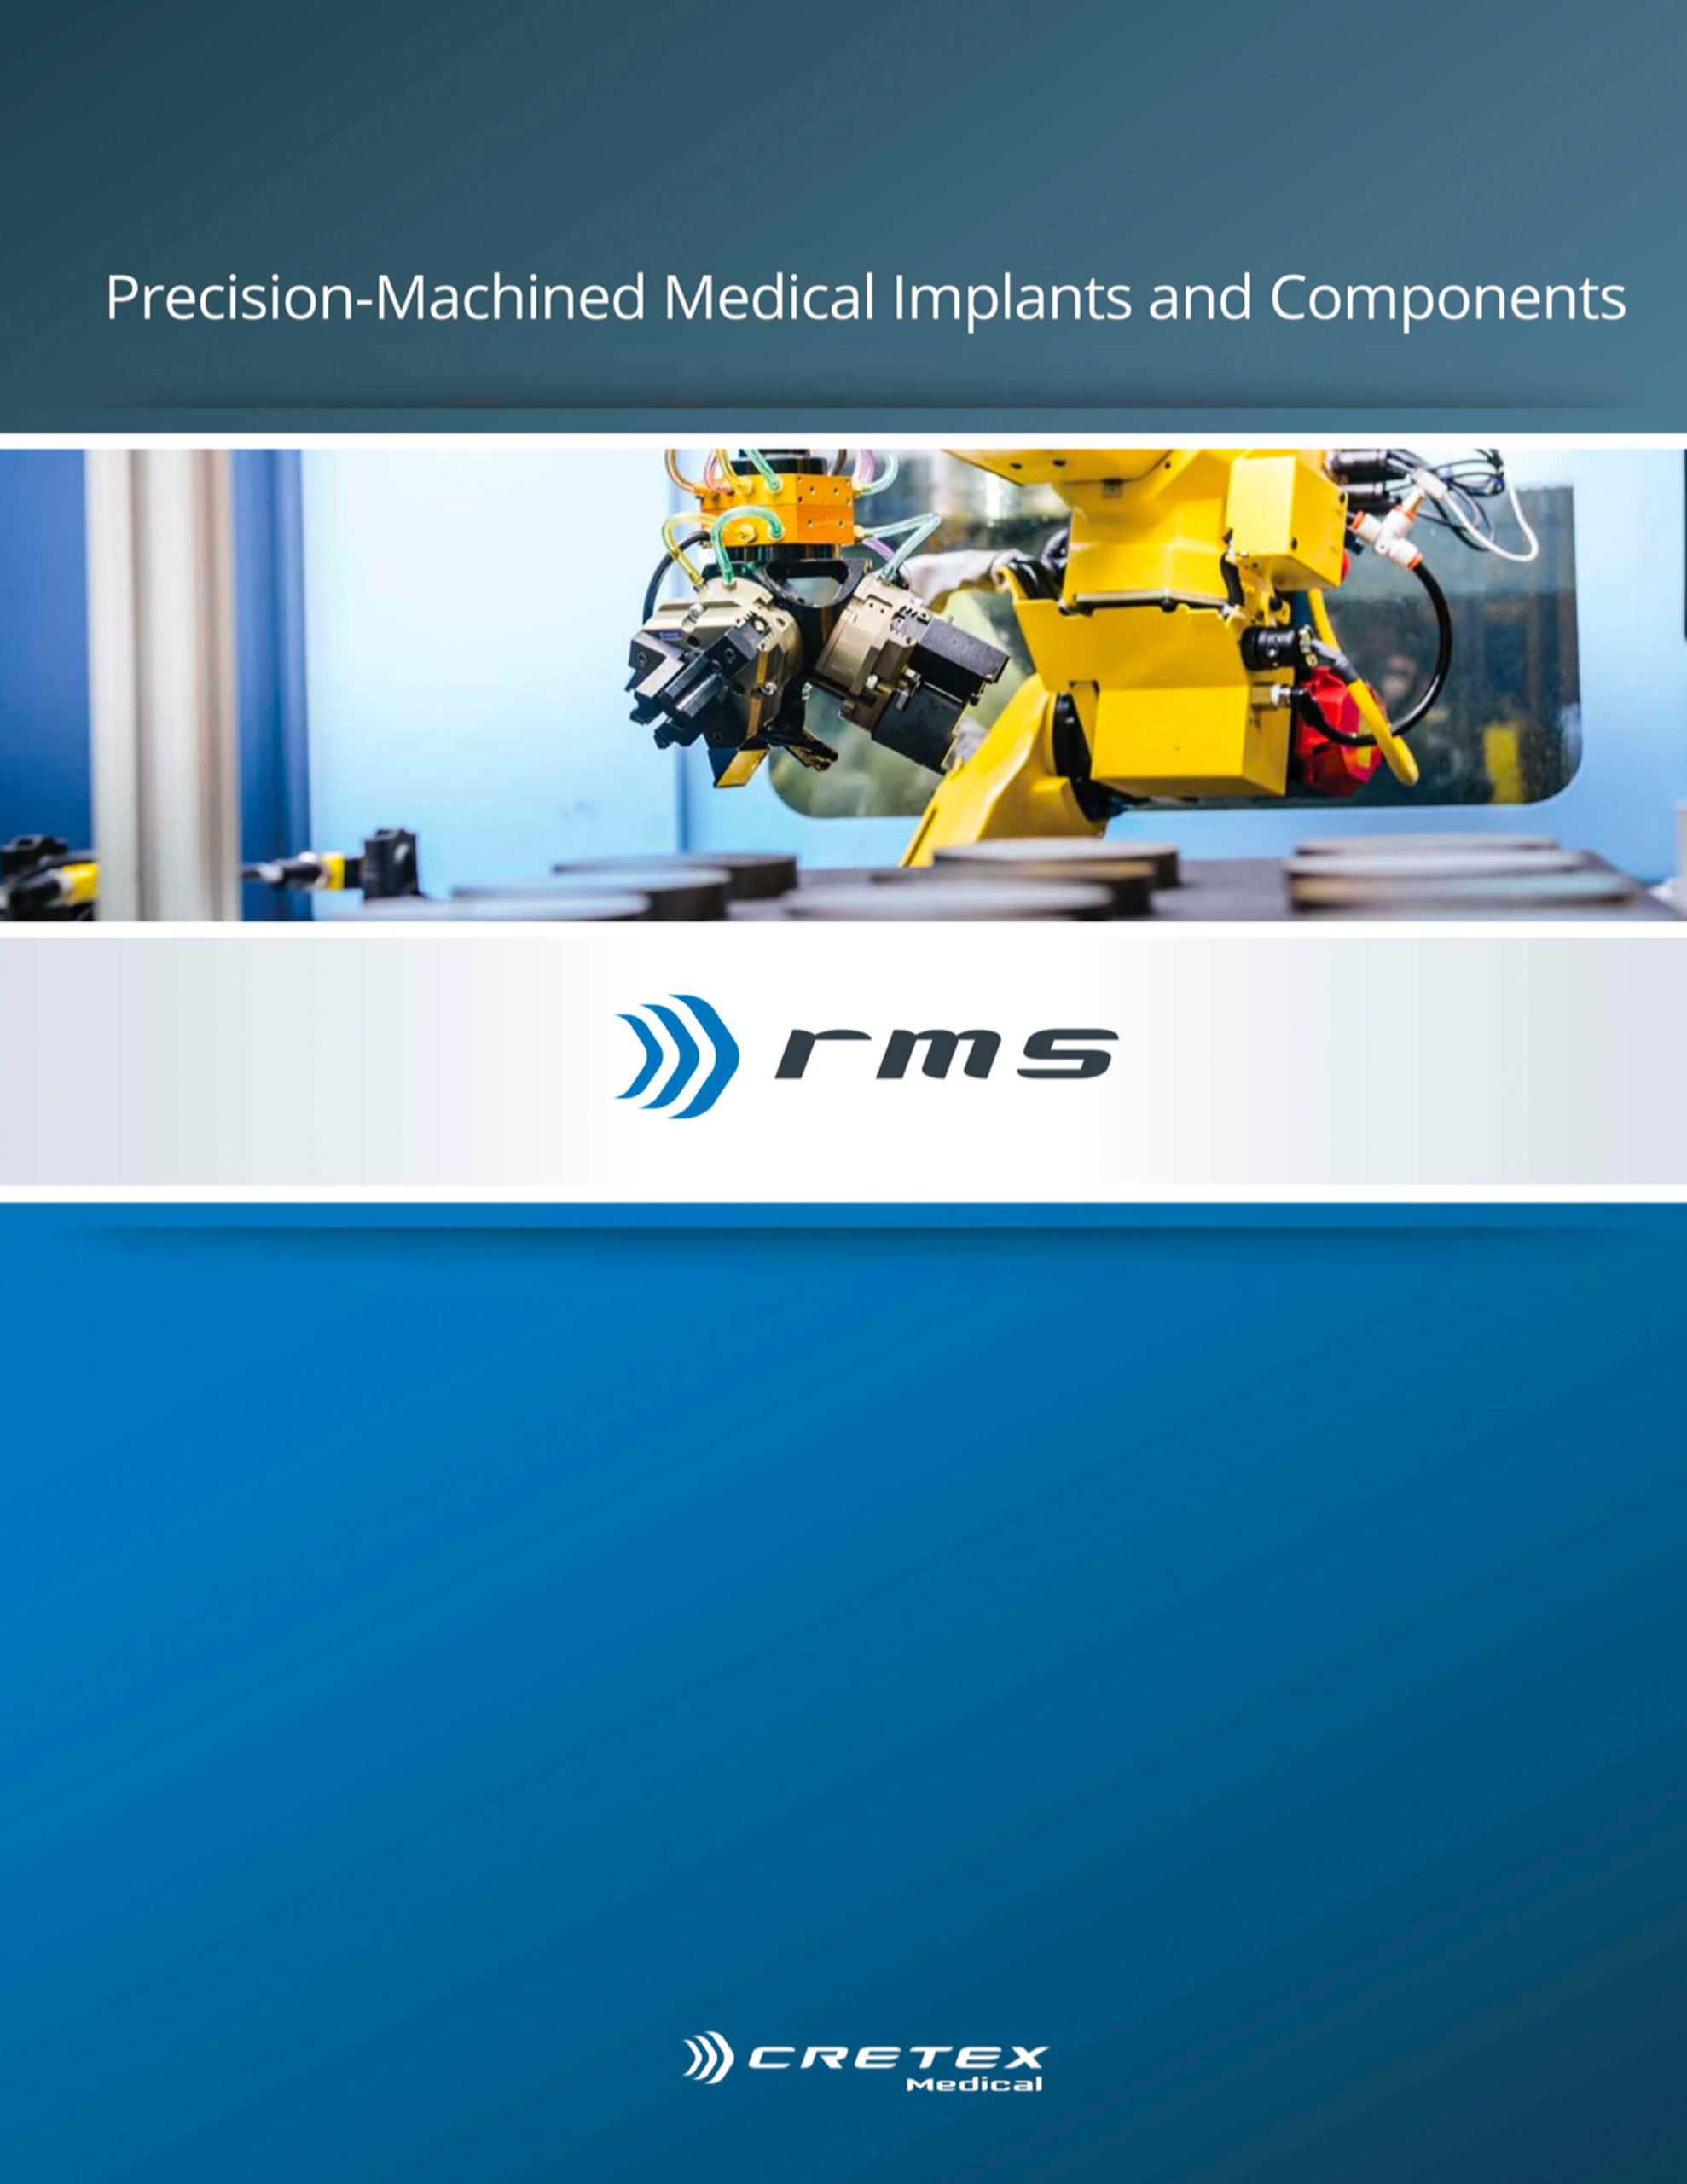 rms-company-brochure-scaled